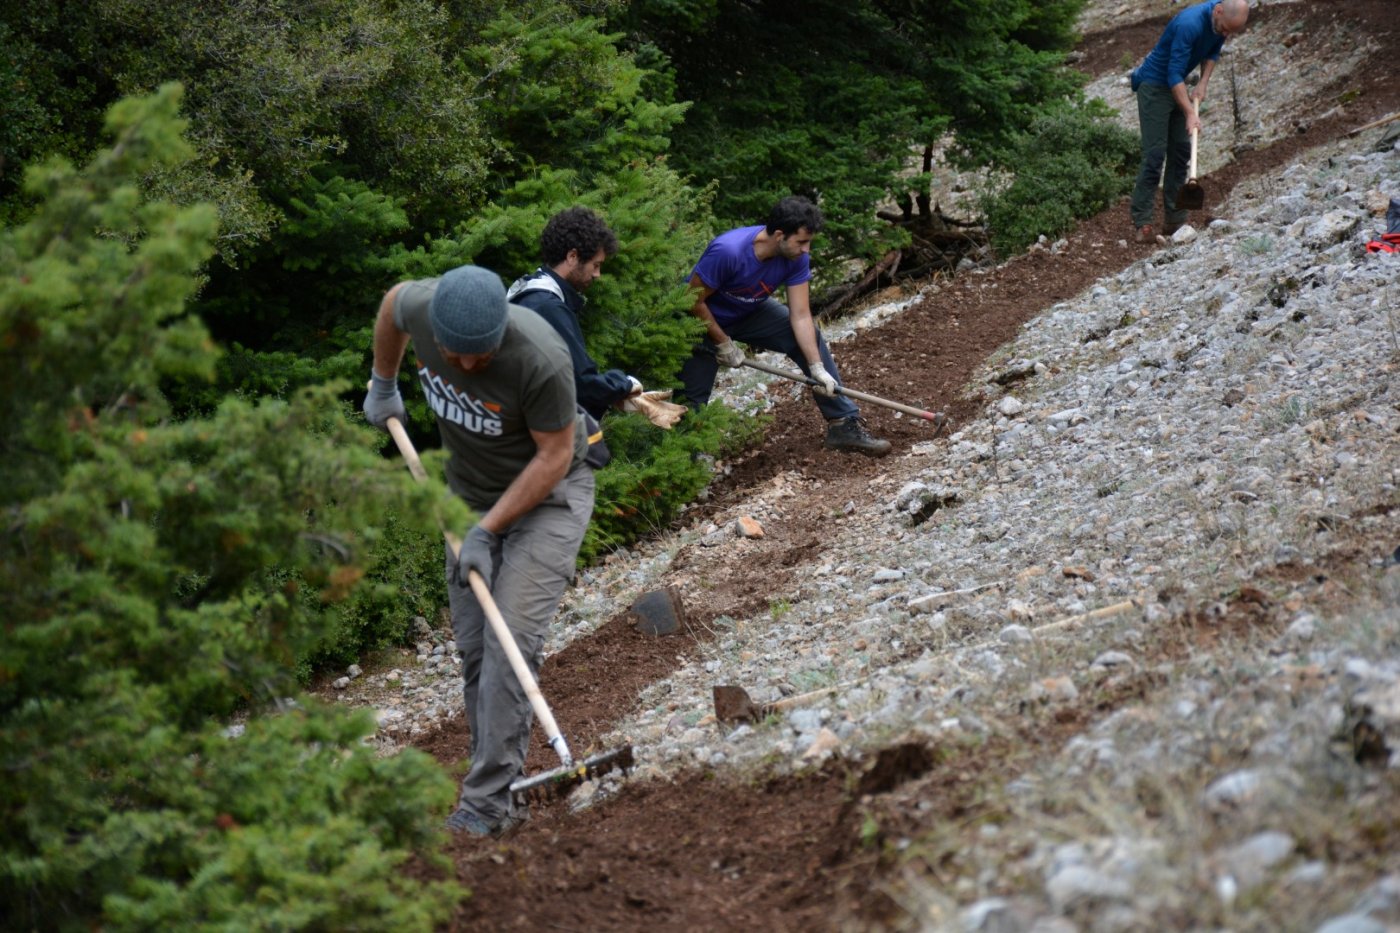 Giona mt / Start of a 2 months volunteering camp / Opening & digging the Pindus trail stitching paths